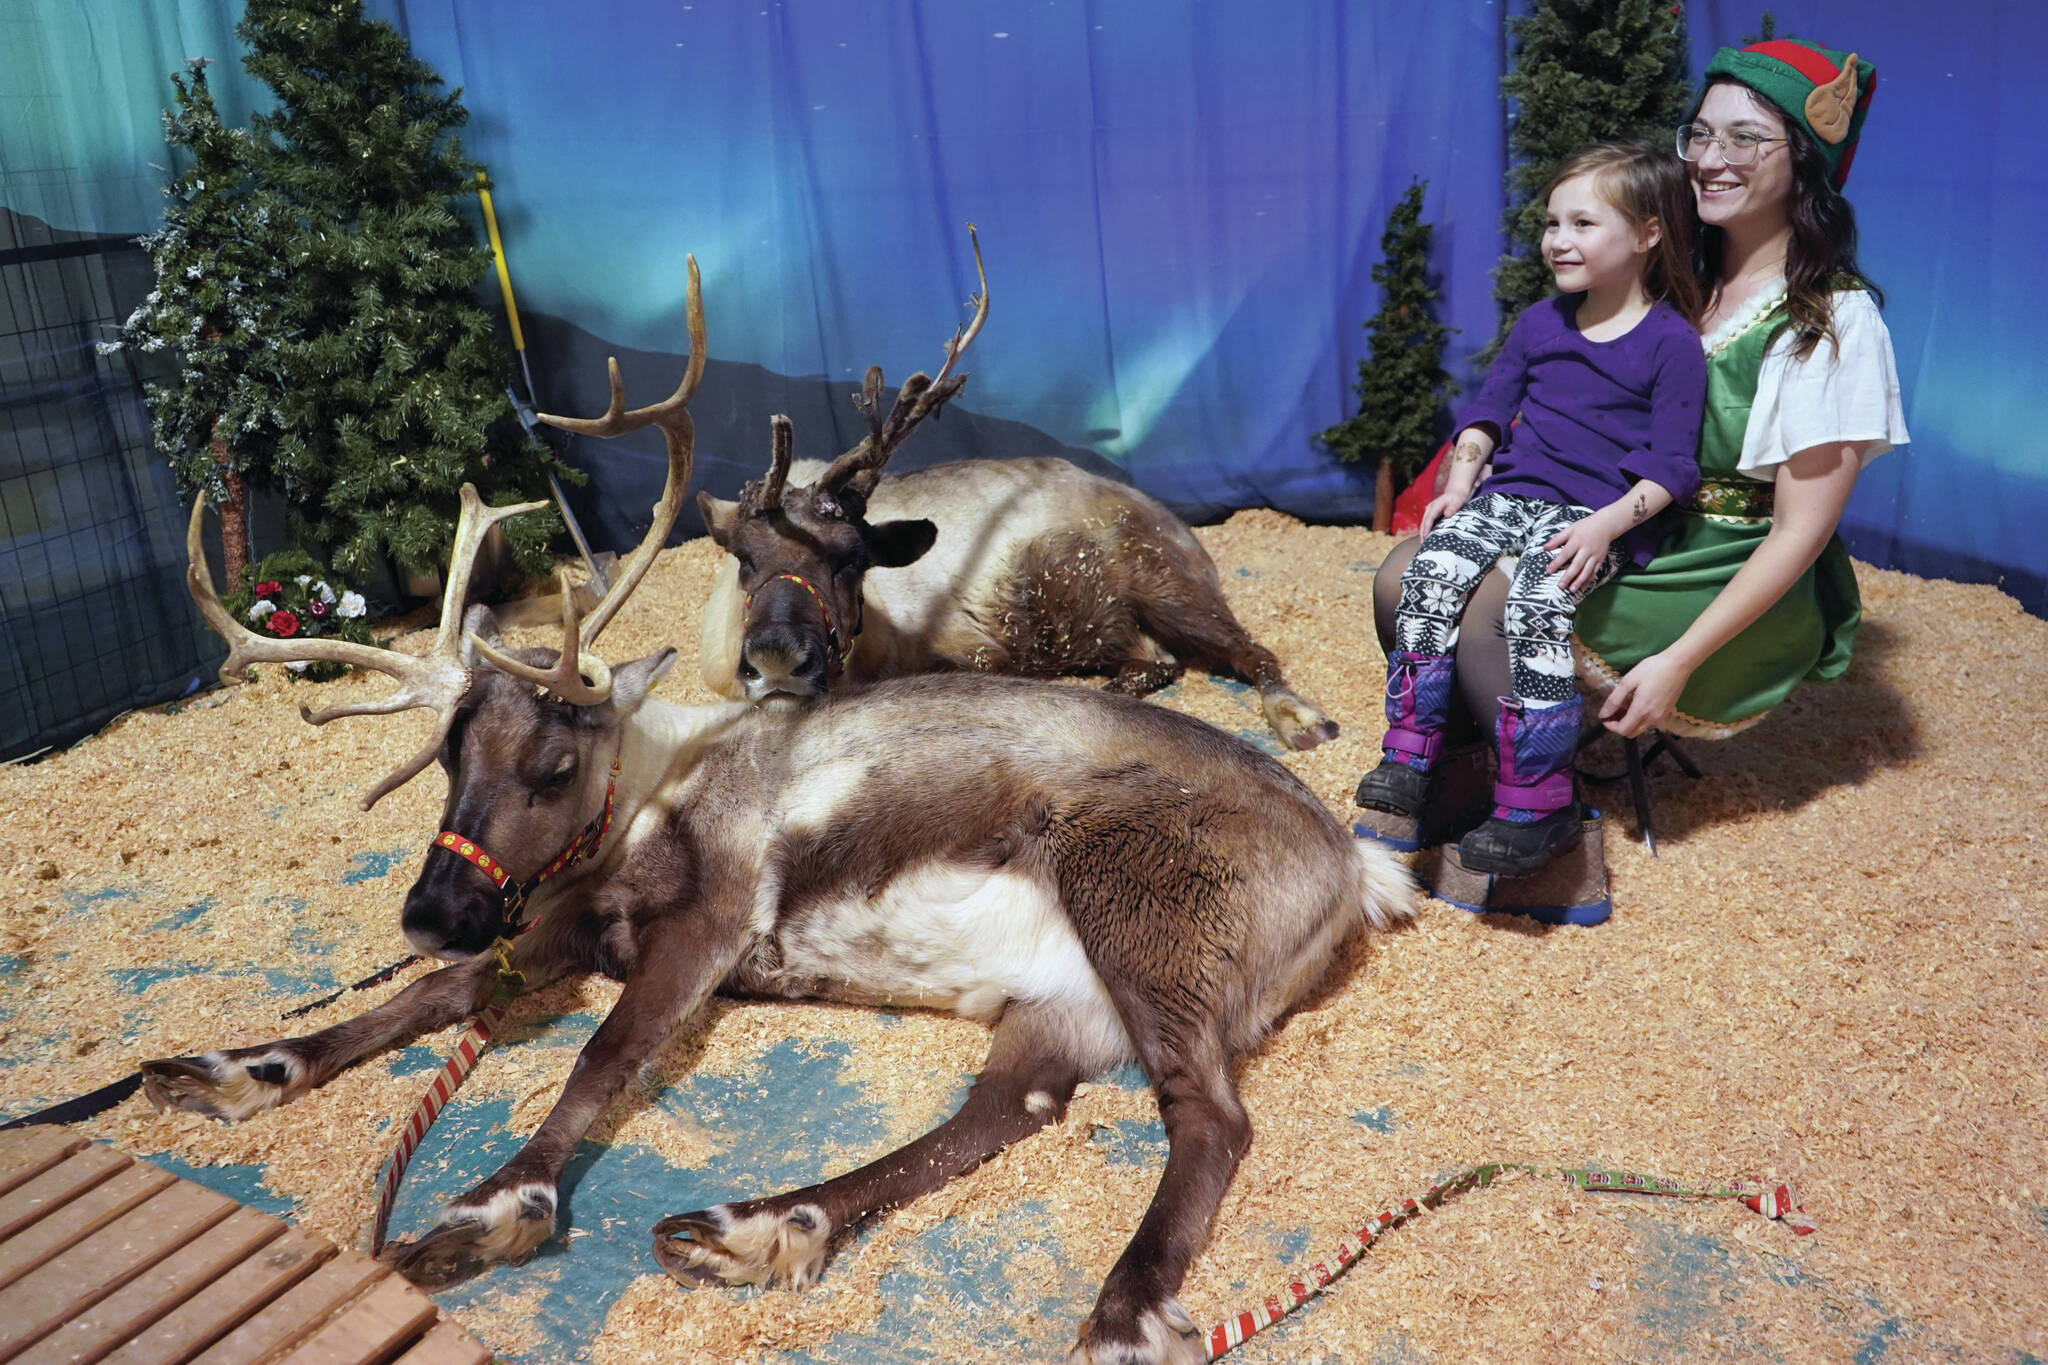 Jake Dye/Peninsula Clarion
Jenna Bedford, of Kenai Reindeer Farm, sits next to her reindeer with Juliana Bedford during the Fourth Annual Holiday Cheer Christmas Bazaar at the Old Carrs Mall in Kenai on Saturday.